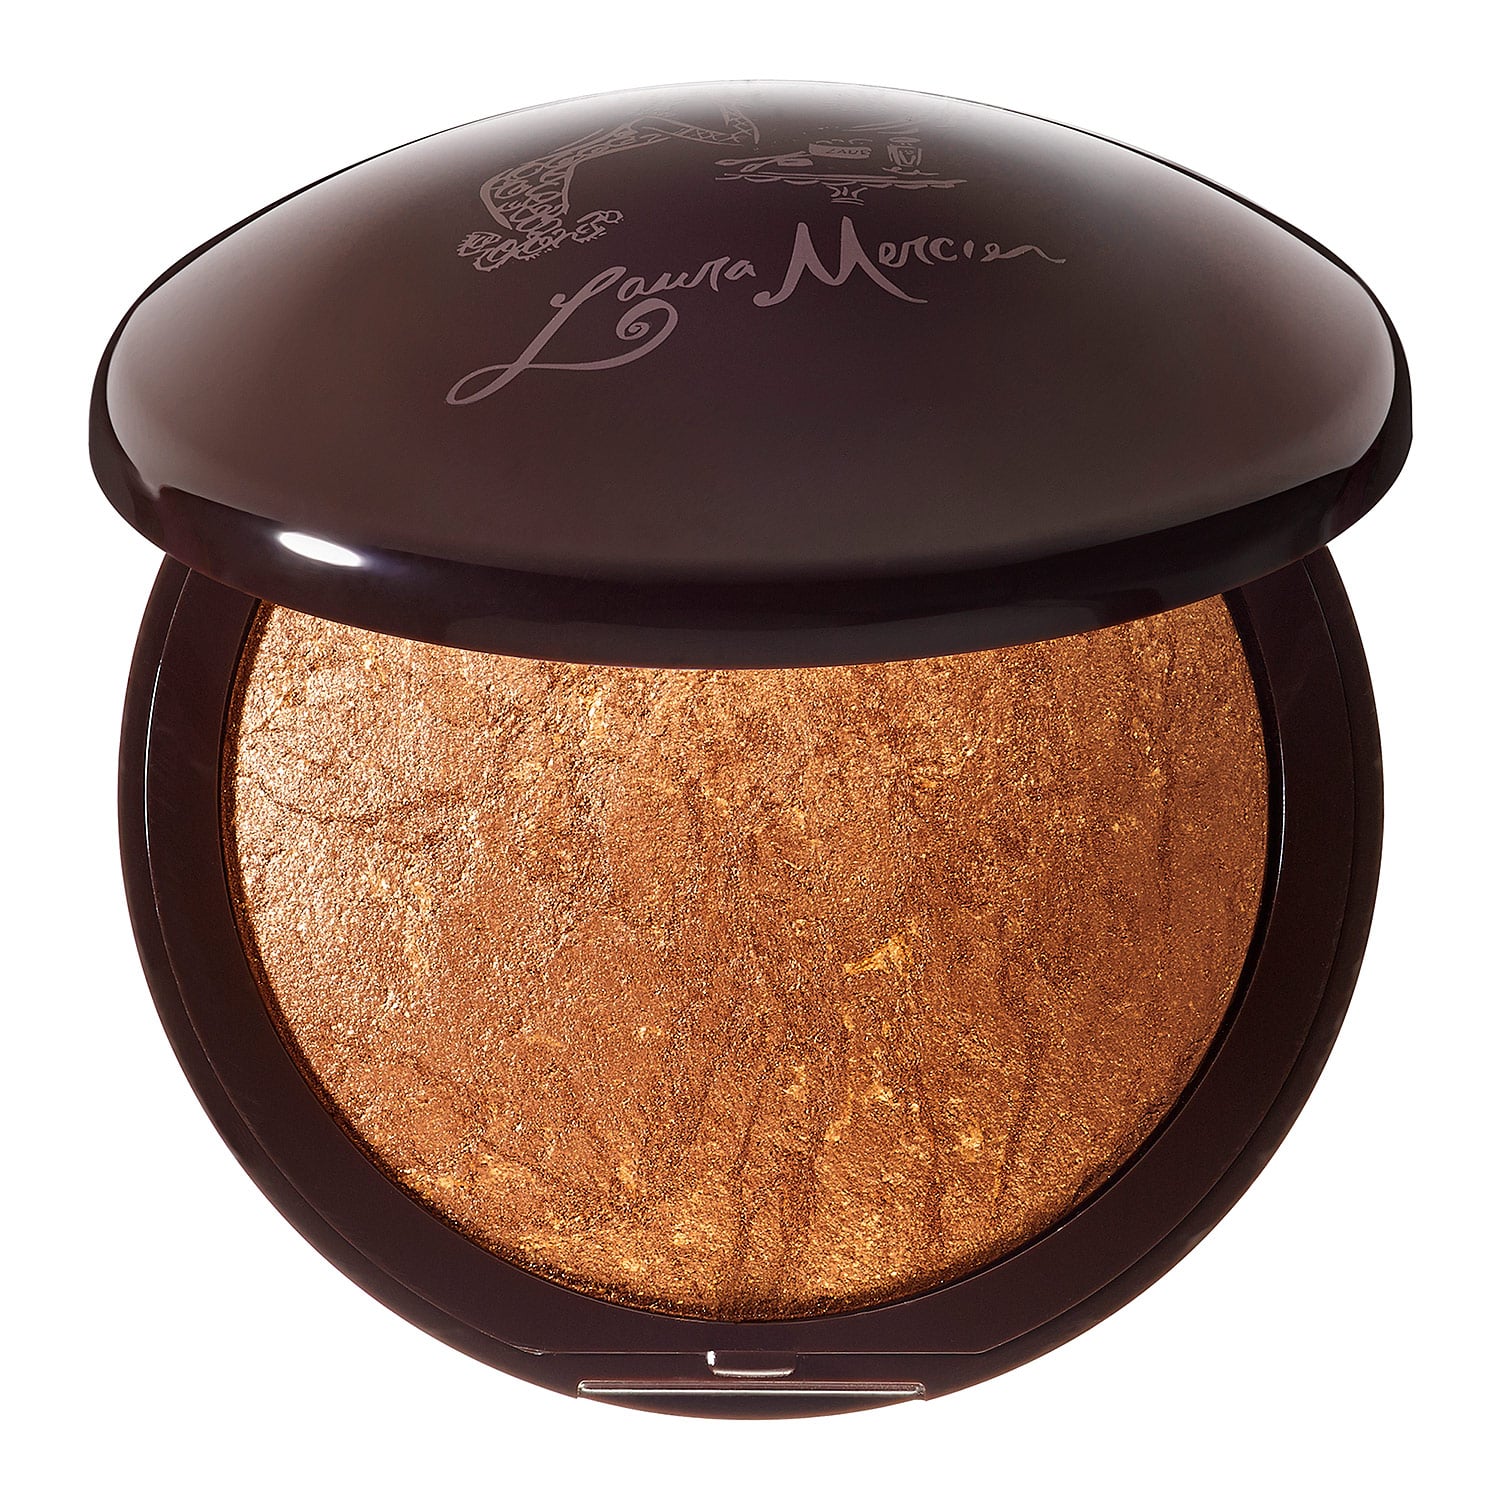 Laura Mercier Radiance Body Bronzer | Brighten Up Your Beauty Routine With These Summery Finds | POPSUGAR Beauty Photo 27